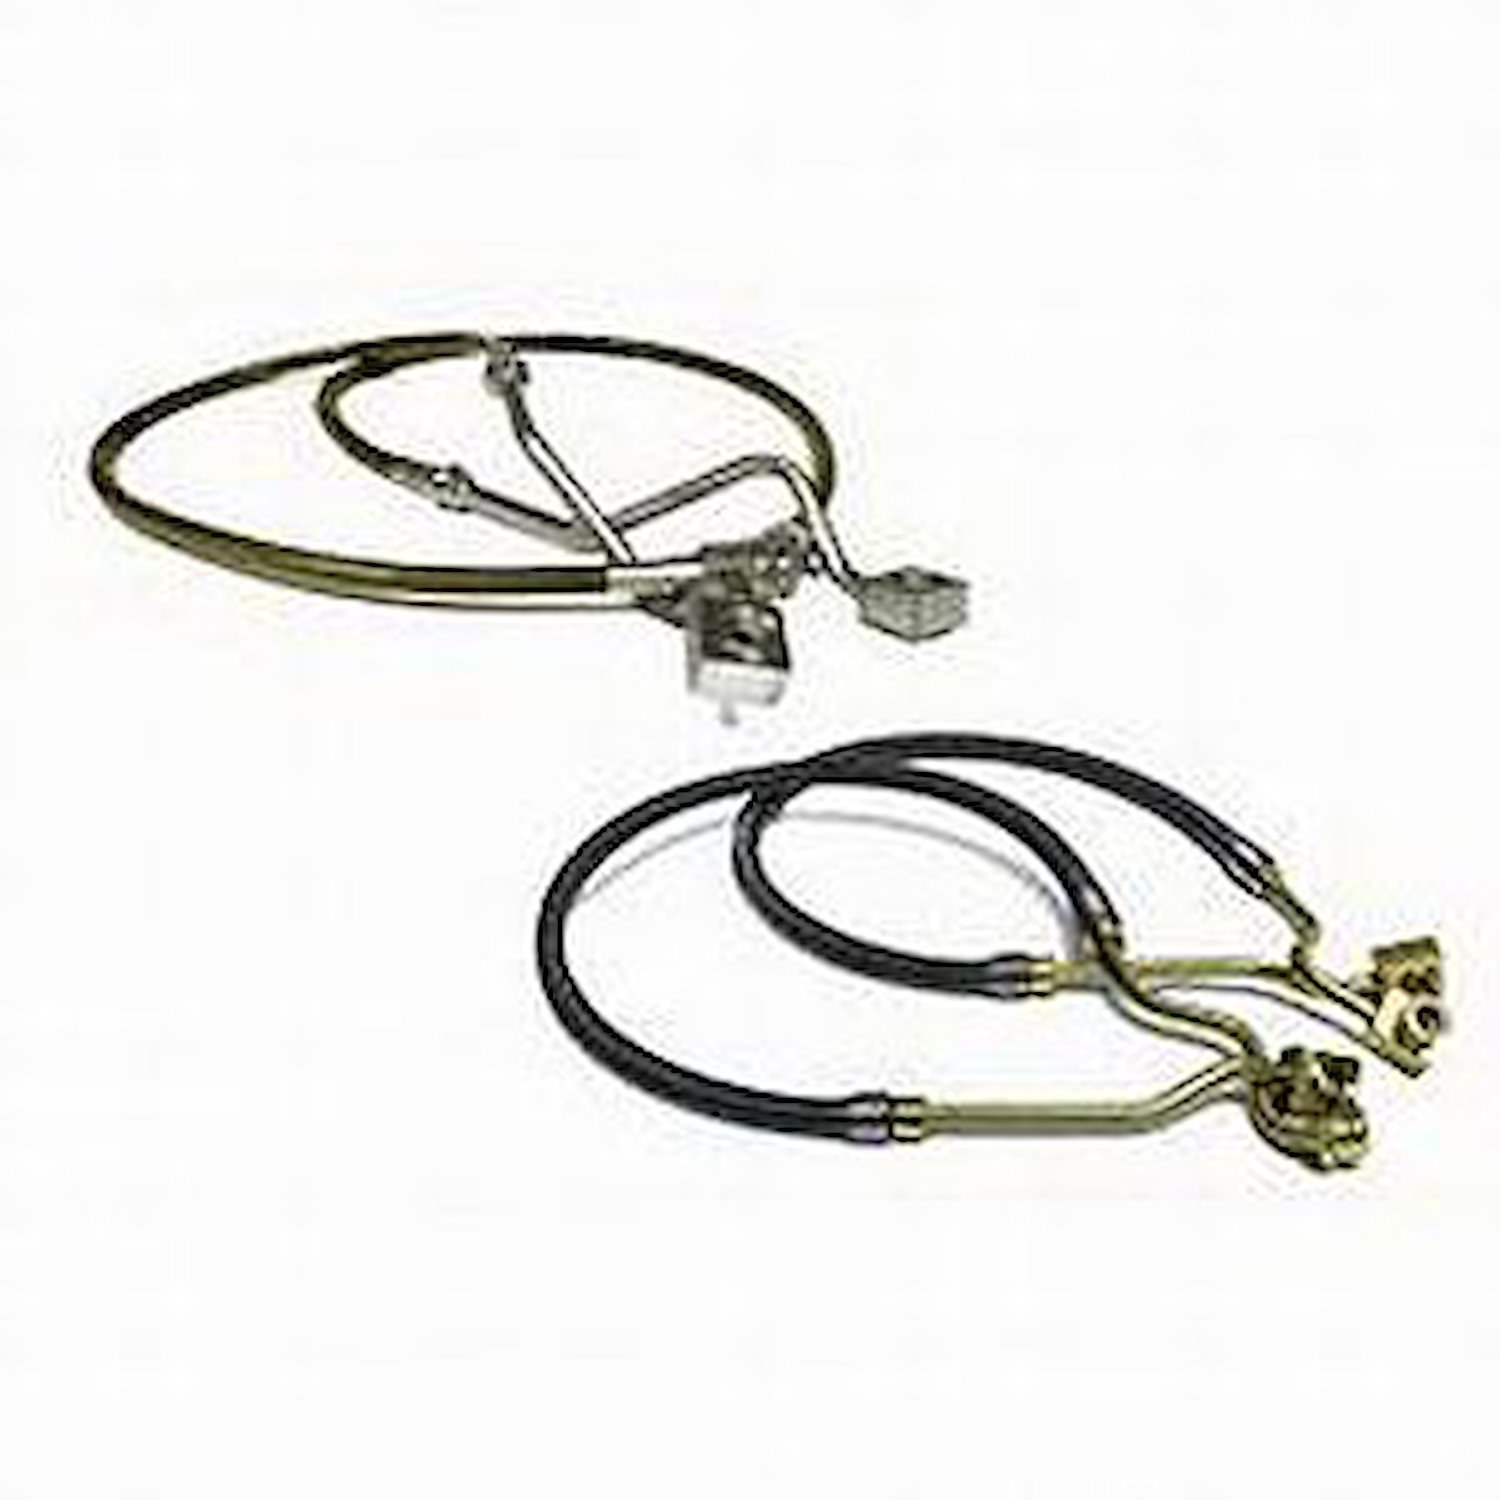 Bullet Proof Kevlar  Brake Hose Front Reinforced Braided Stainless Steel Vehicles w/4-6 in. Lift